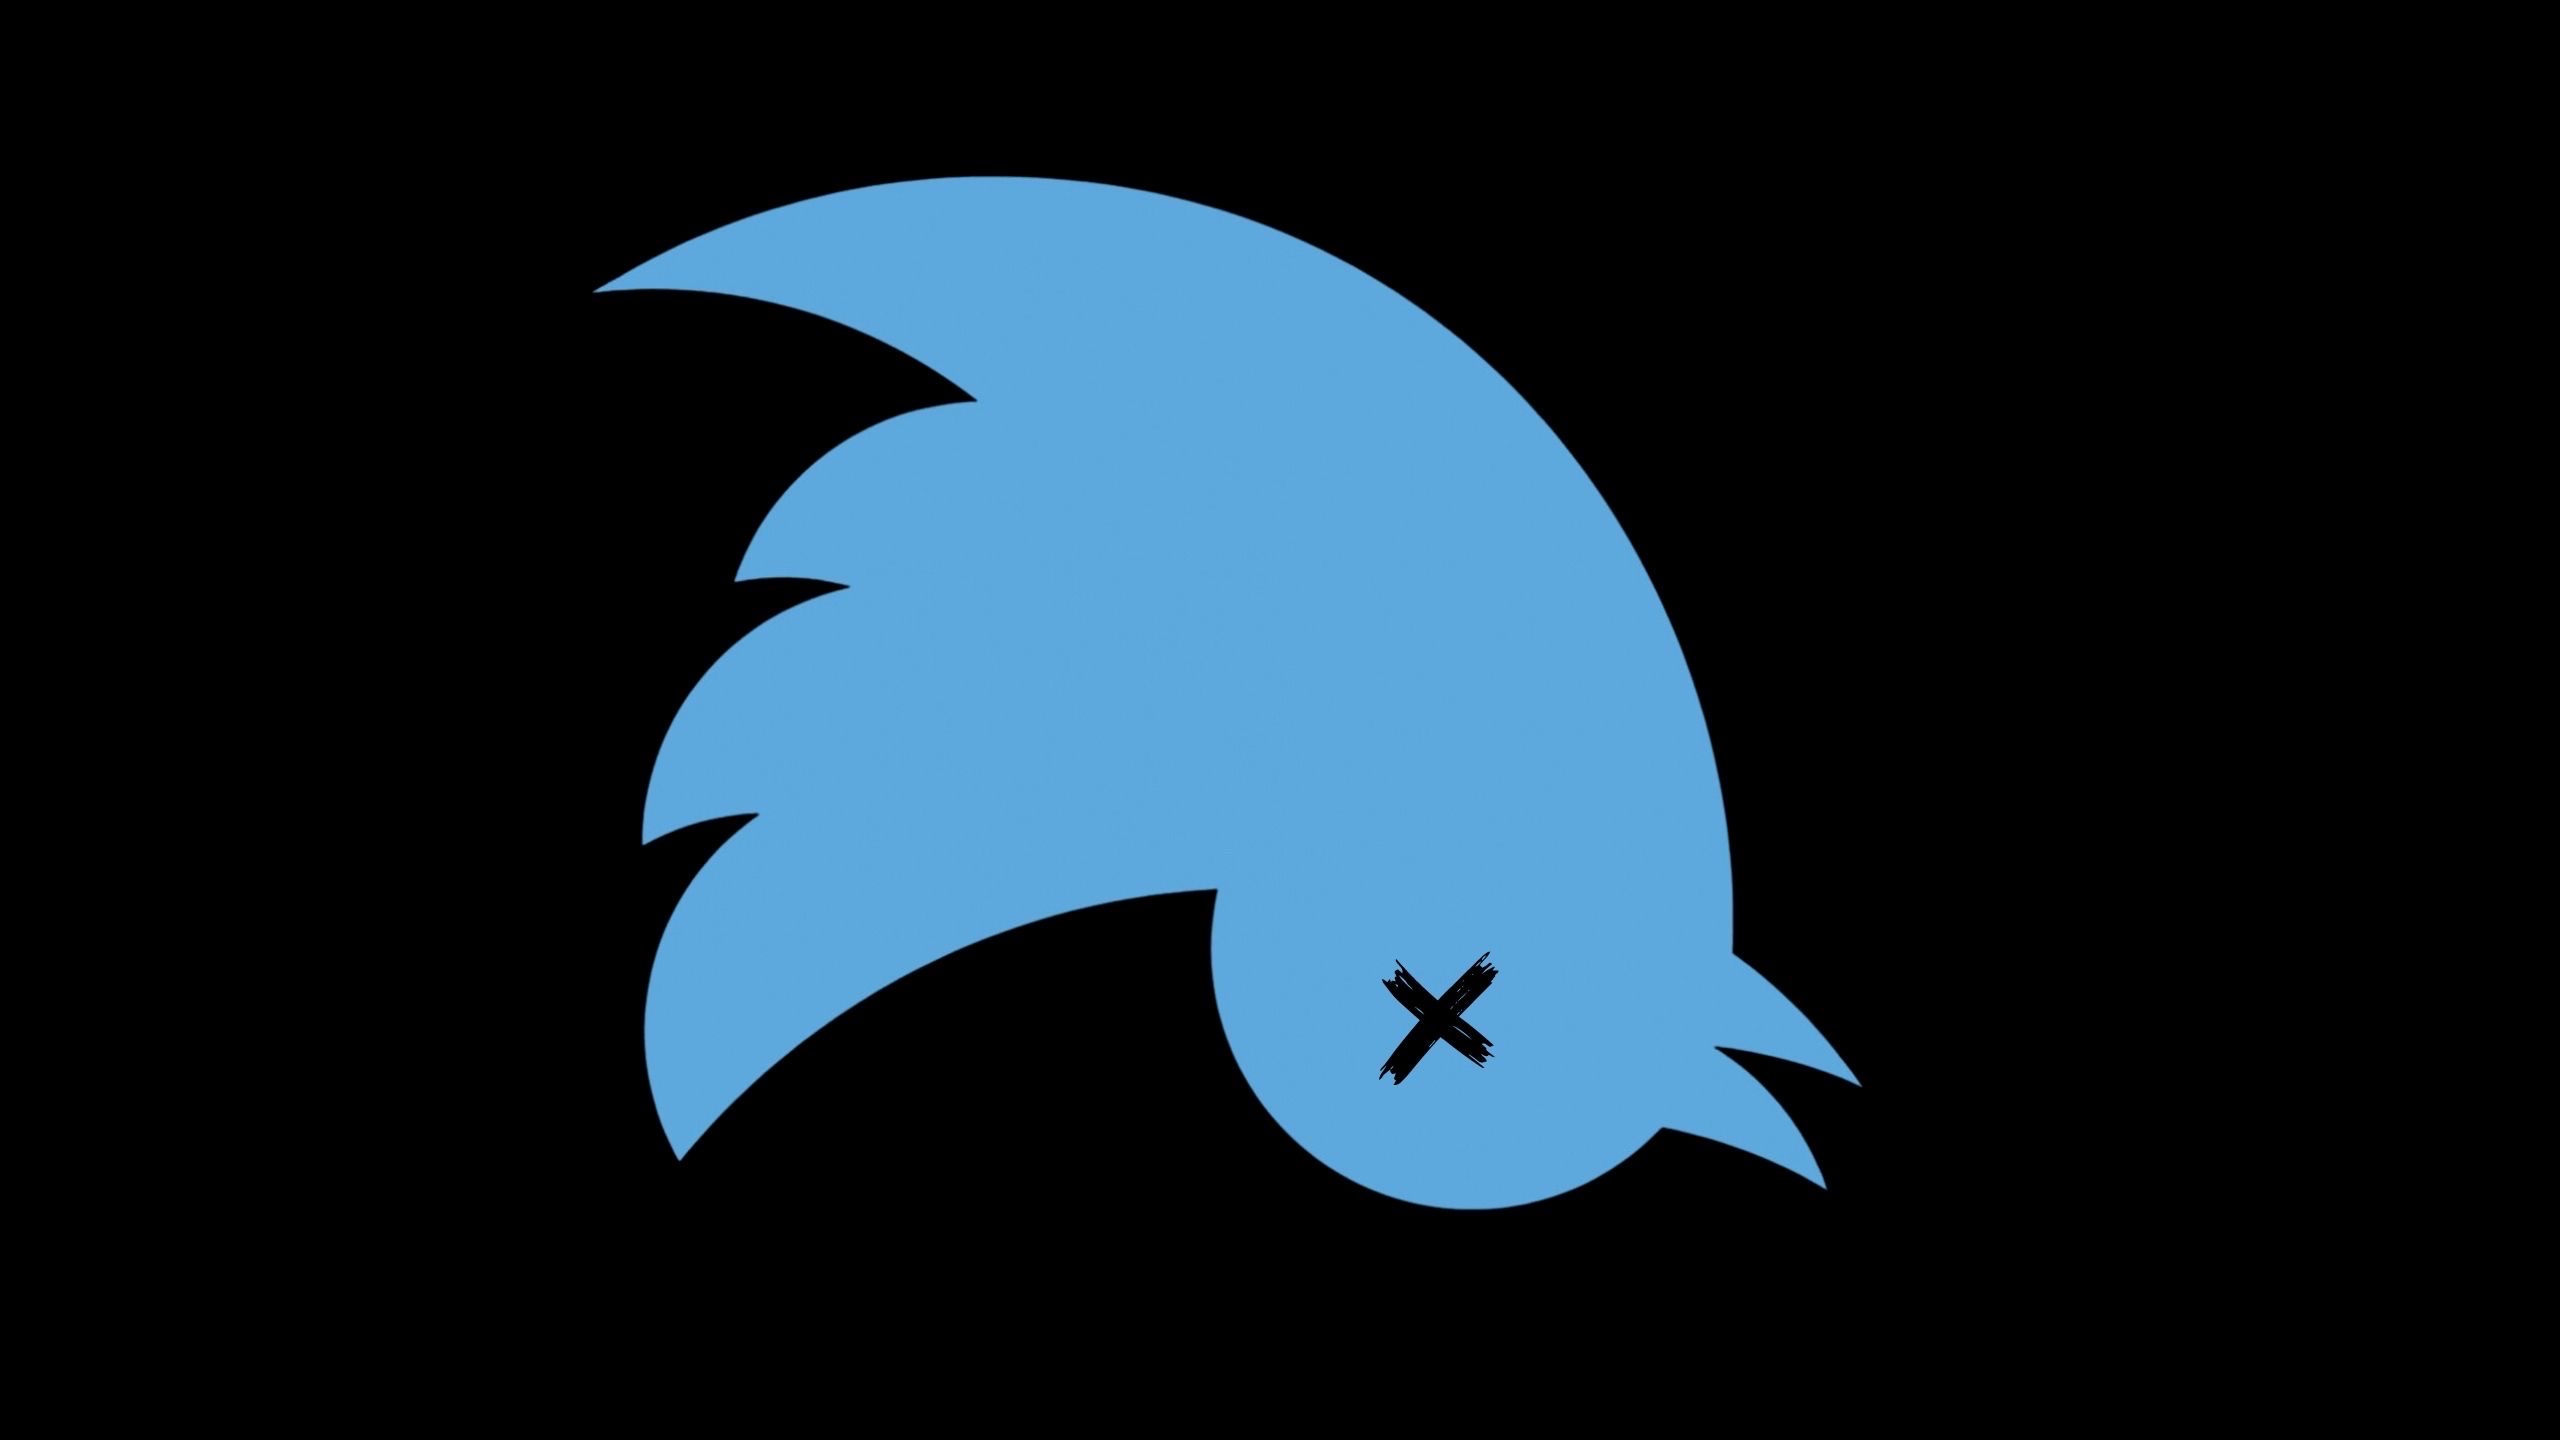 It’s Time for Free Speech Proponents to Let Twitter Die